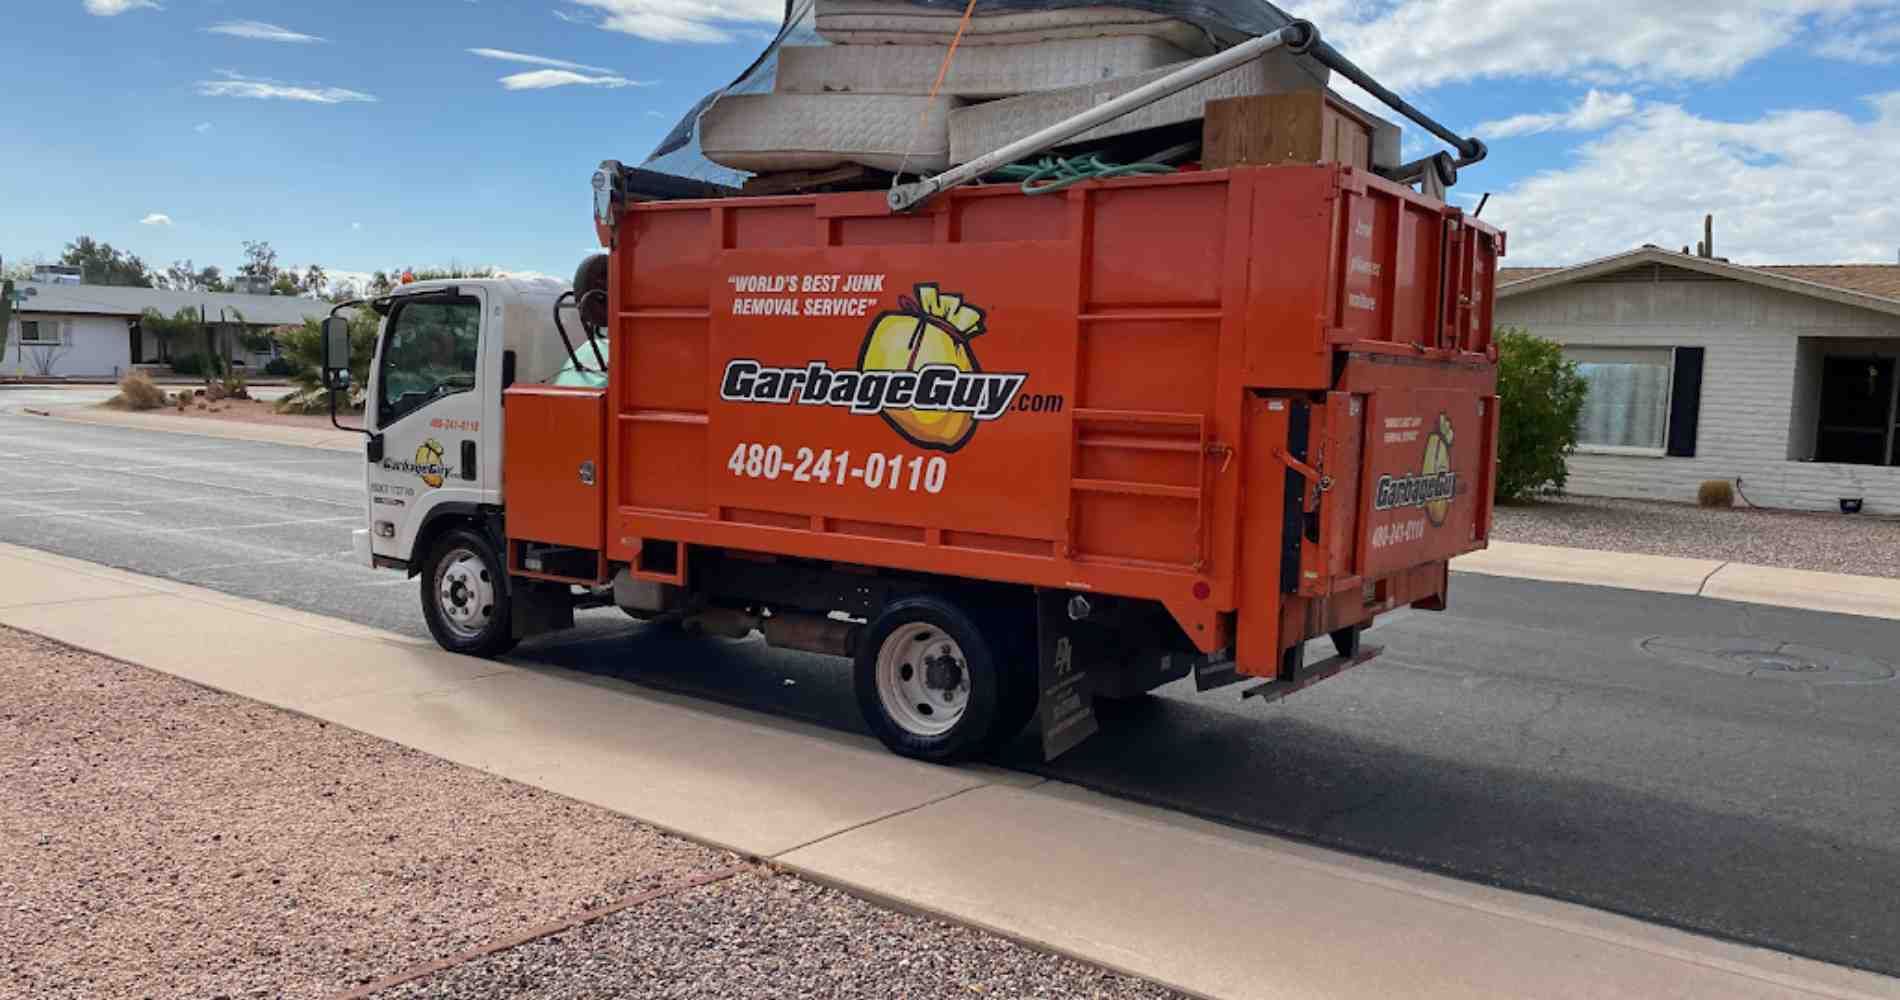 #1 for Curbside Trash Pickup in Surprise, AZ with Over 1200 5-Star Reviews!